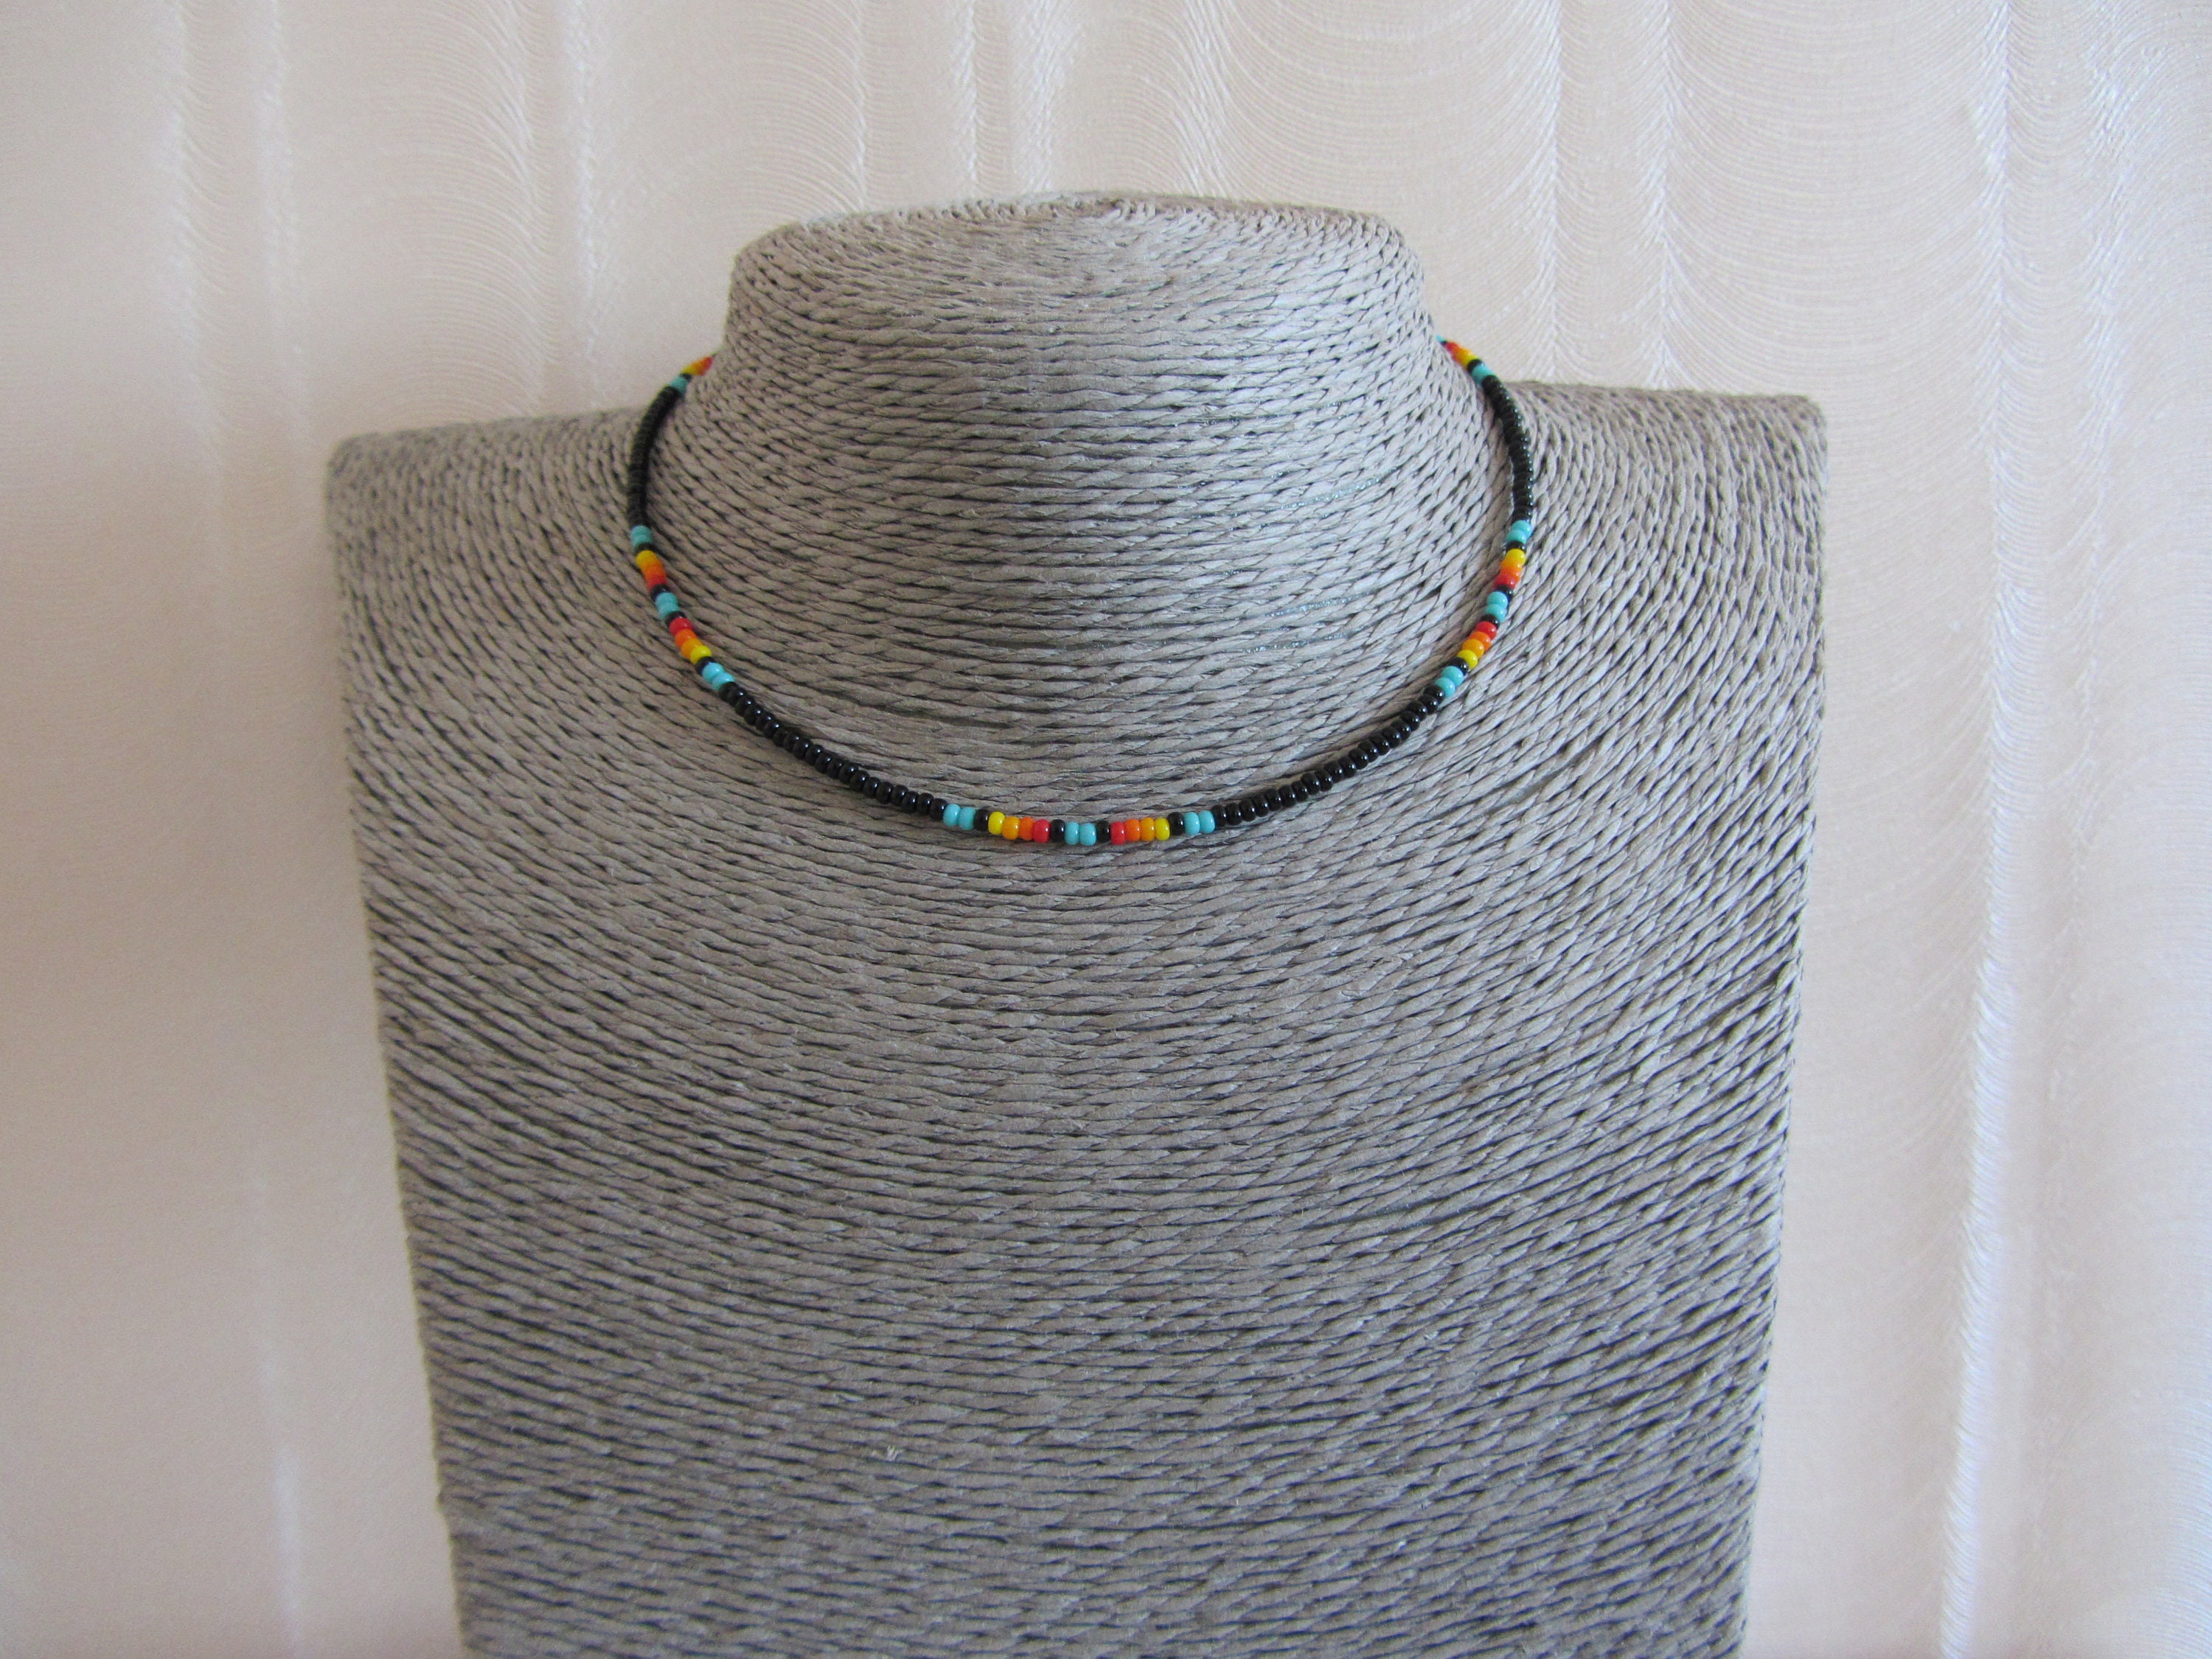 How to make a beaded choker necklace – Beads, Inc.